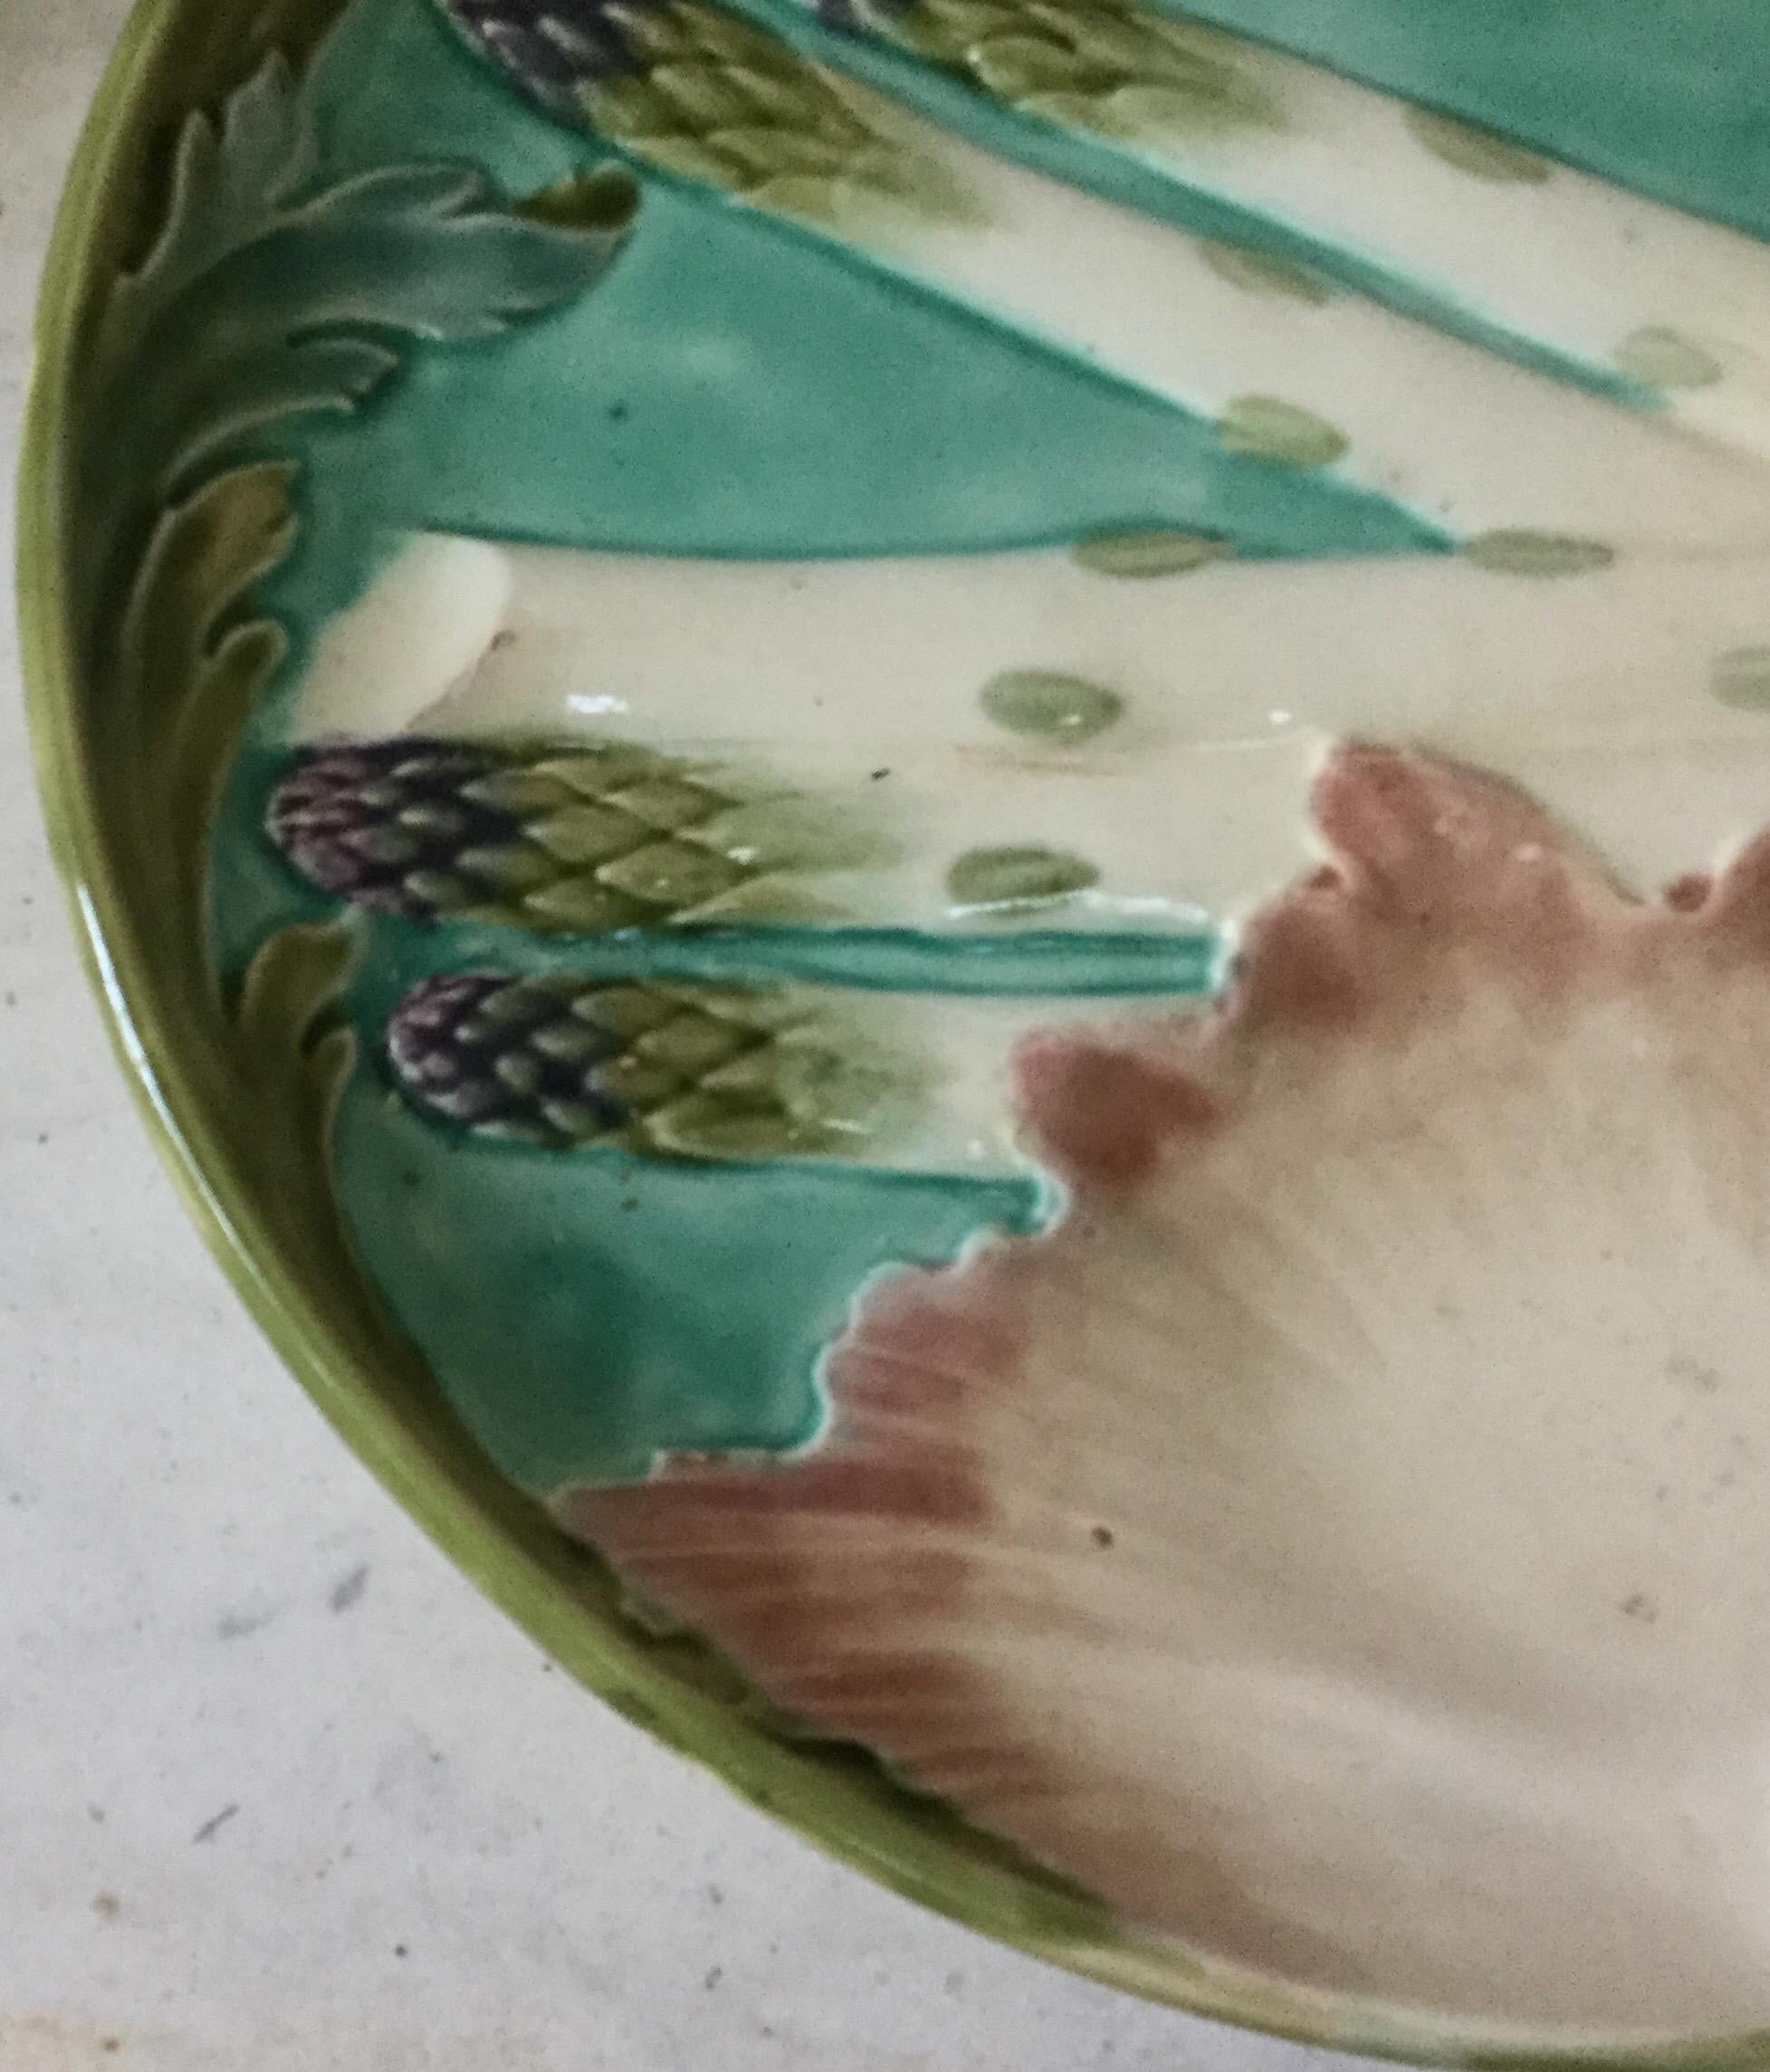 Large Majolica asparagus plate signed Keller et Guerin Luneville, circa 1880.
This plate exist in different colors and sizes this one is the largest size.
A set of smaller size is also available.